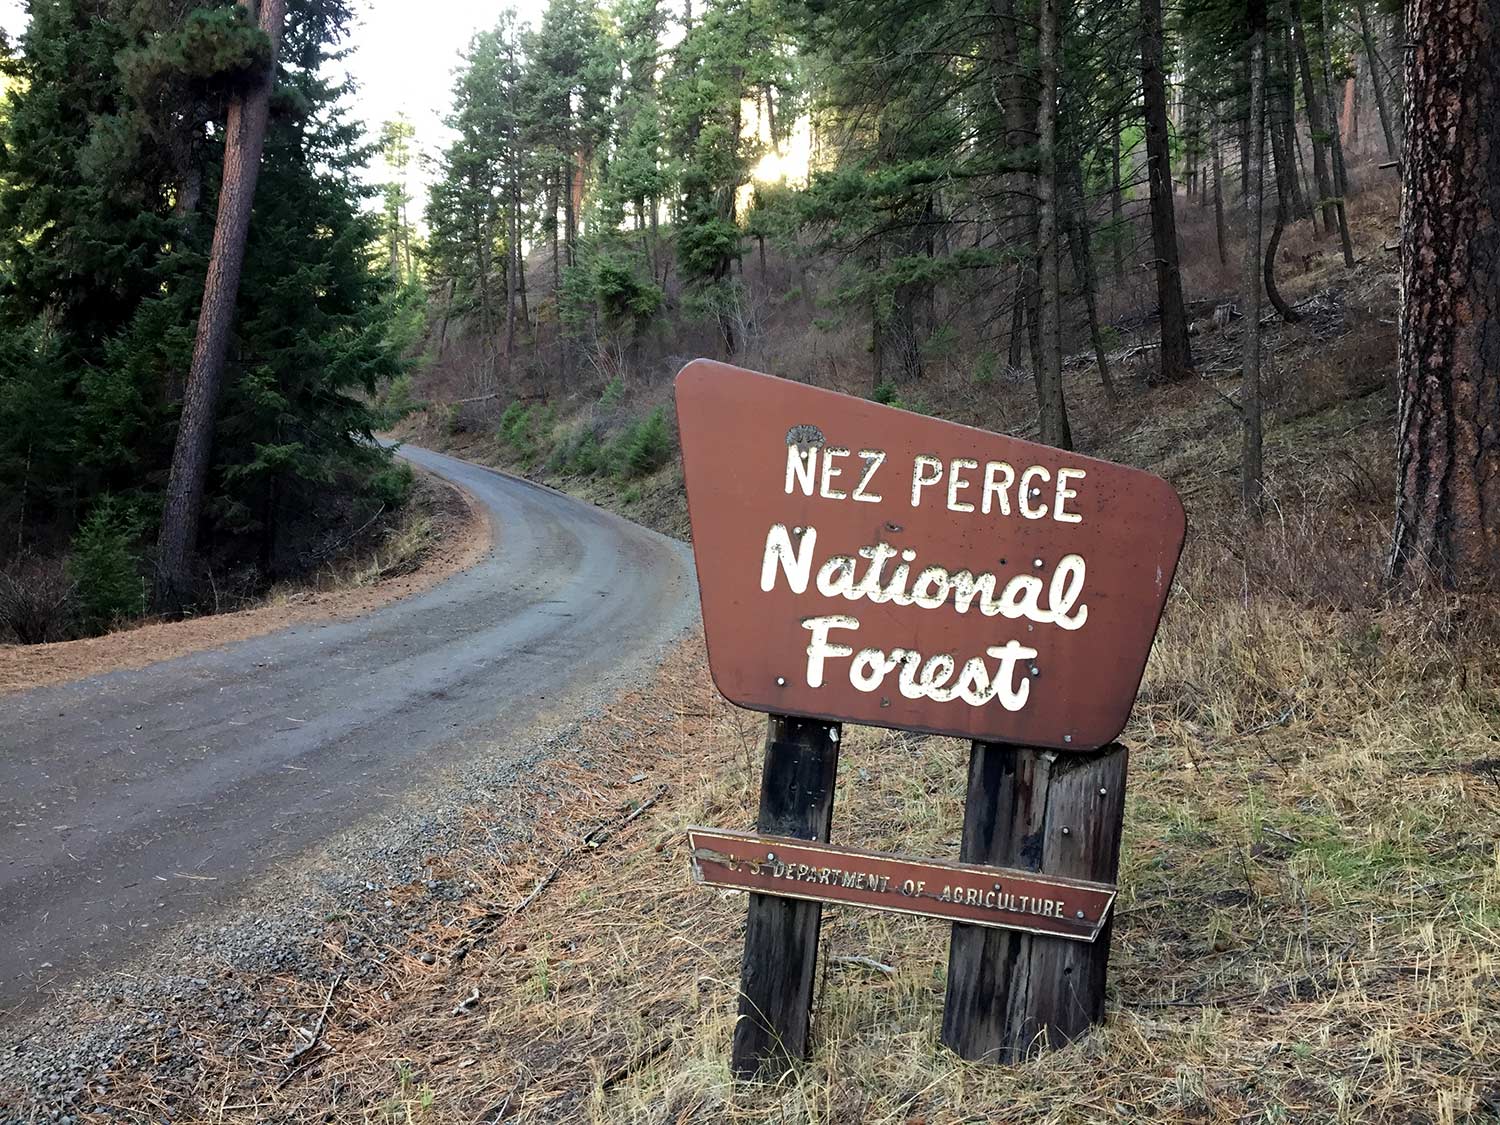 A welcome sign outside the Nez Perce National Forest.